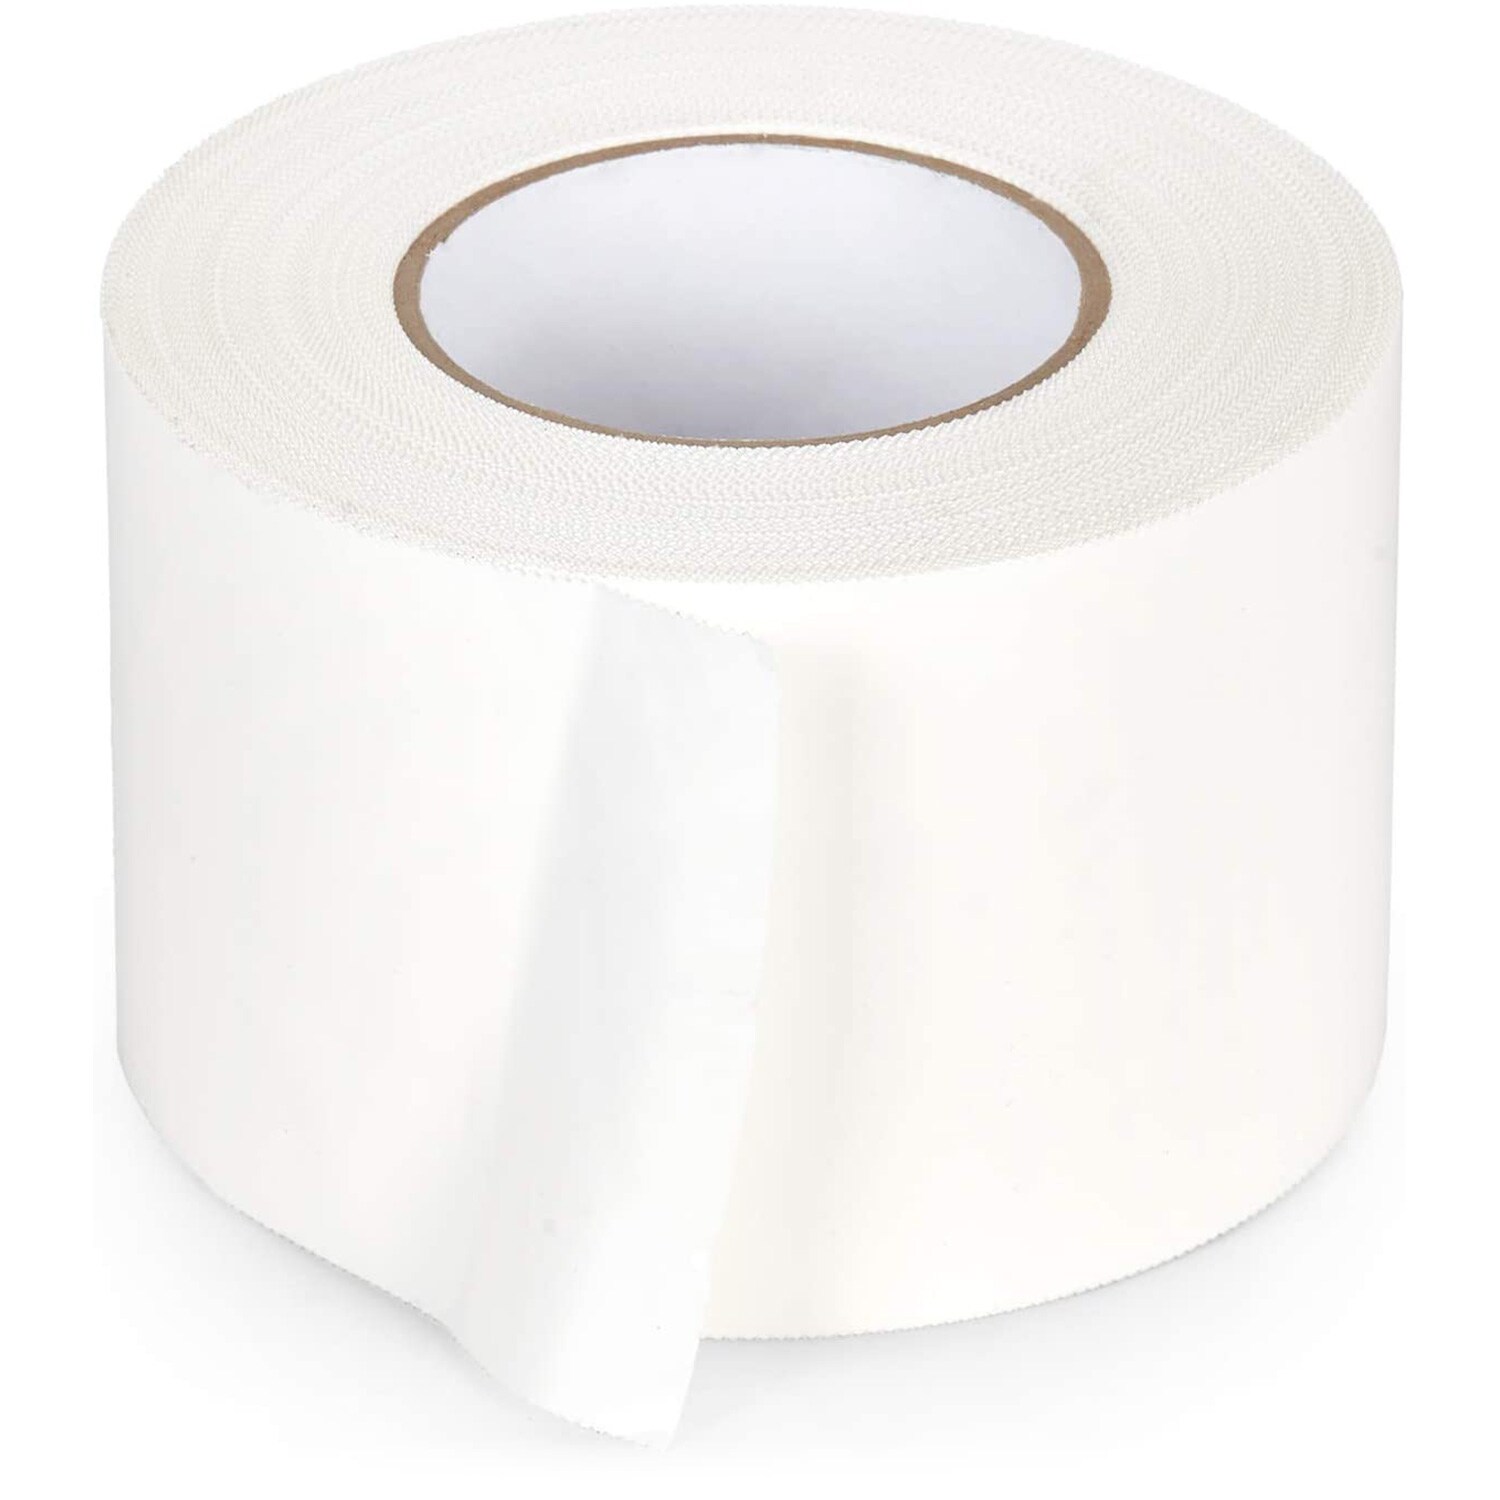 WOD Tape White Duct Tape 4.72 in x 60 yd. Strong Waterproof DTC10